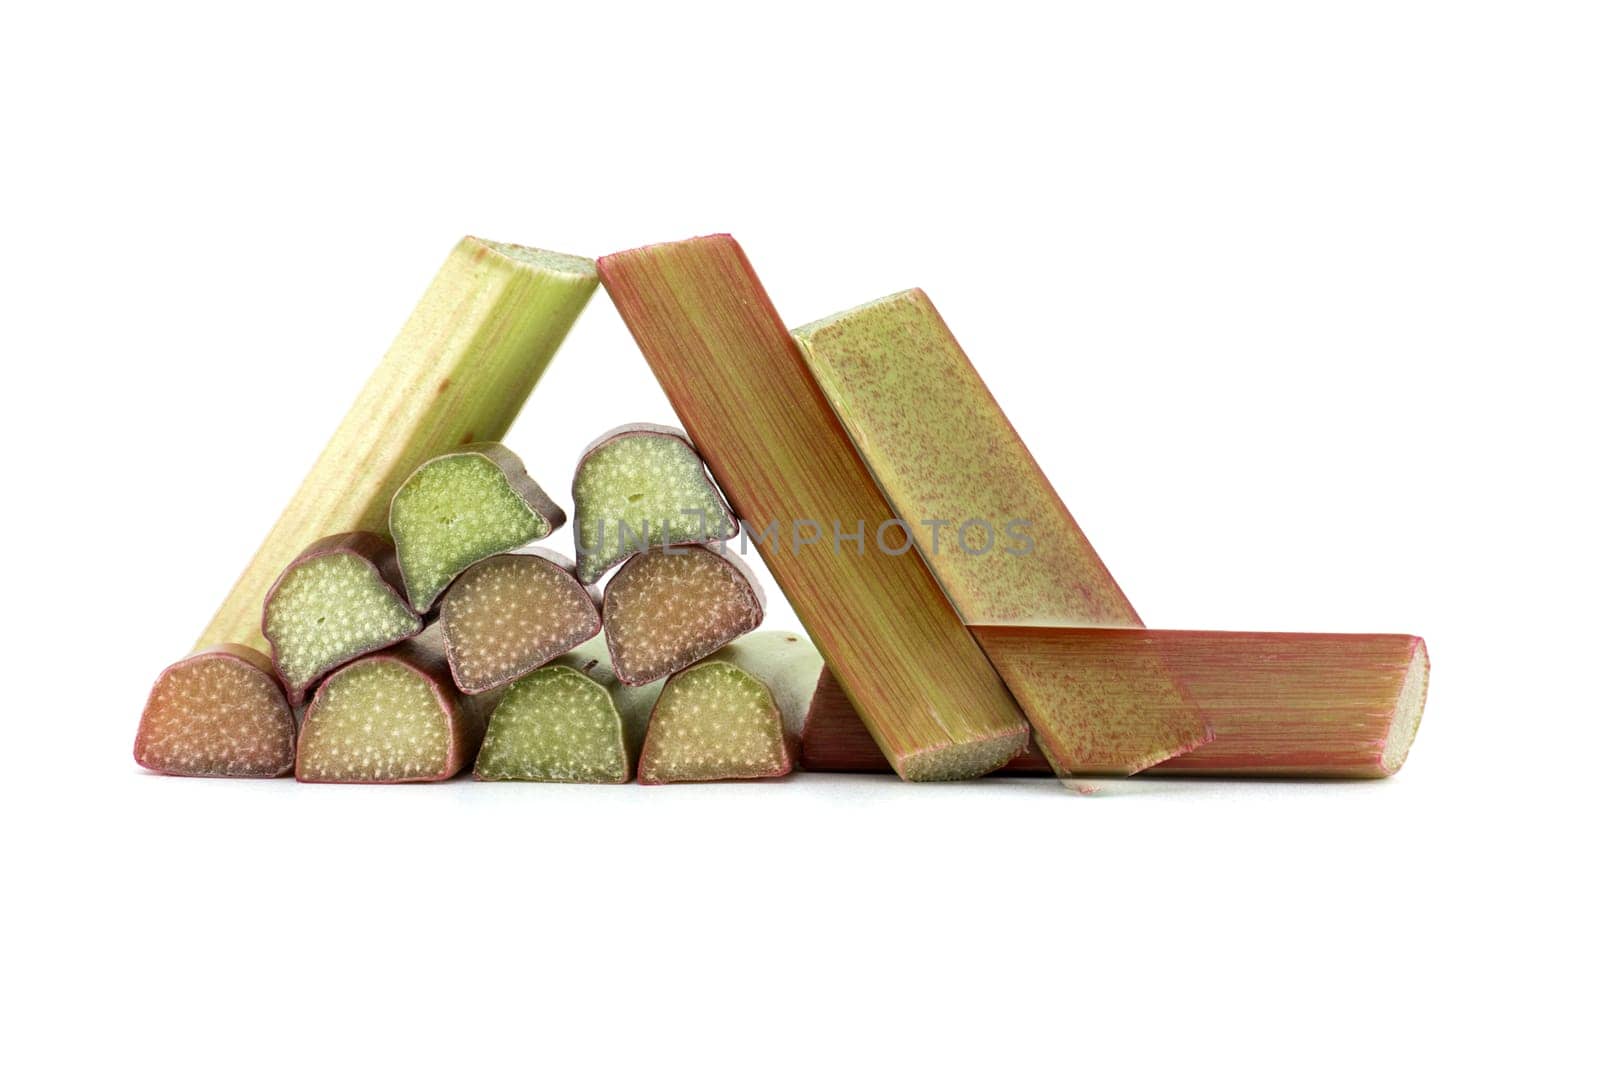 Variety of rhubarb stalks of varying colors from pale green to deep red isolated on white background, health benefits of eating rhubarb